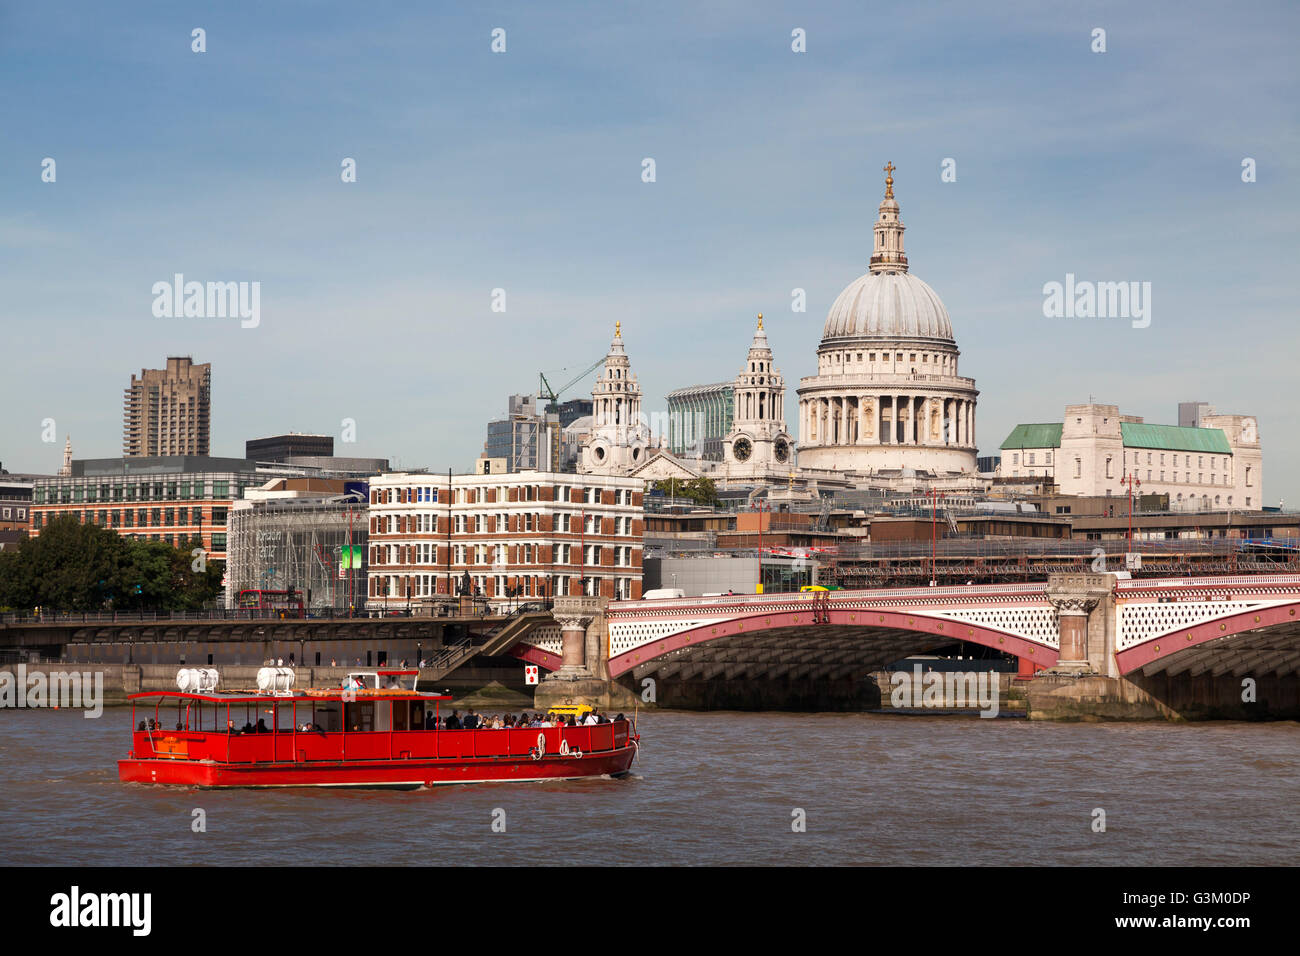 Red River Cruiser on the Thames, Saint Paul's Cathedral at back, London, England, United Kingdom, Europe Stock Photo